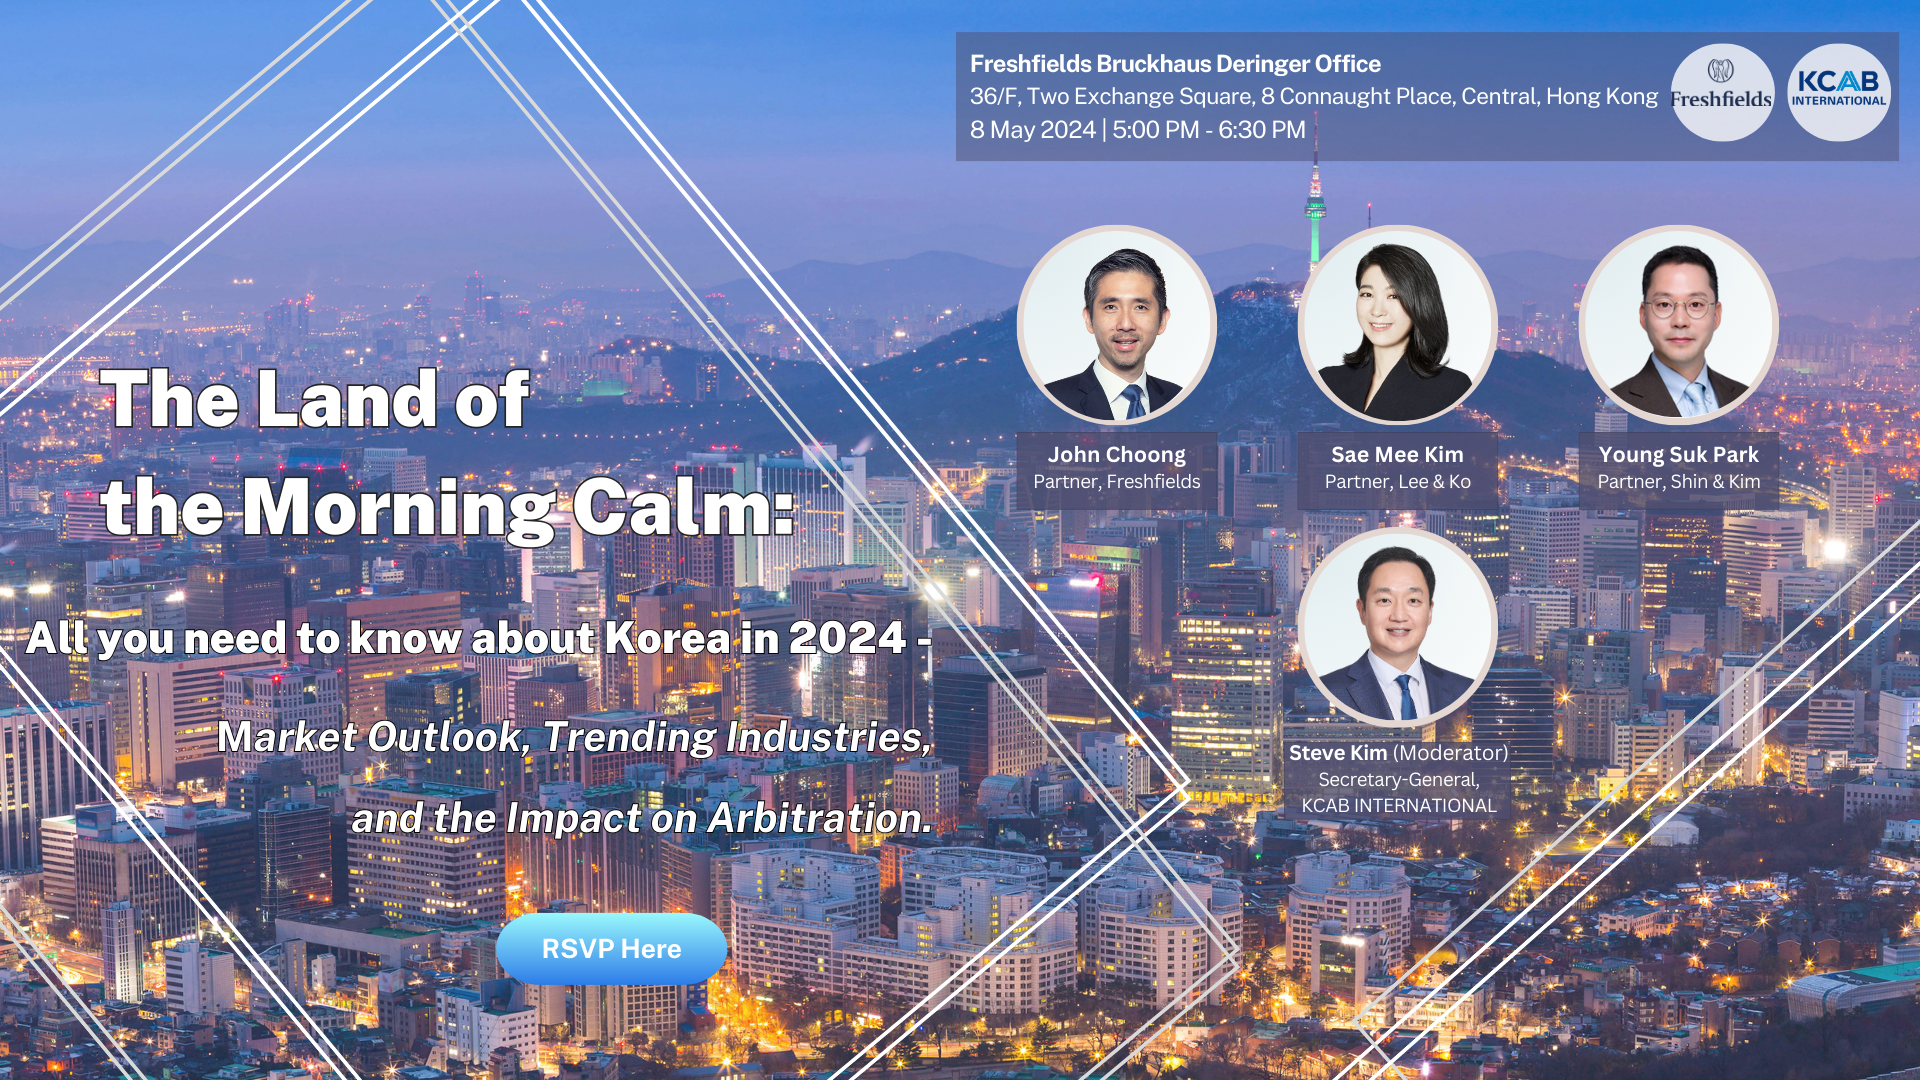 [Seminar] The Land of the Morning Calm: All you need to know about Korea in 2024